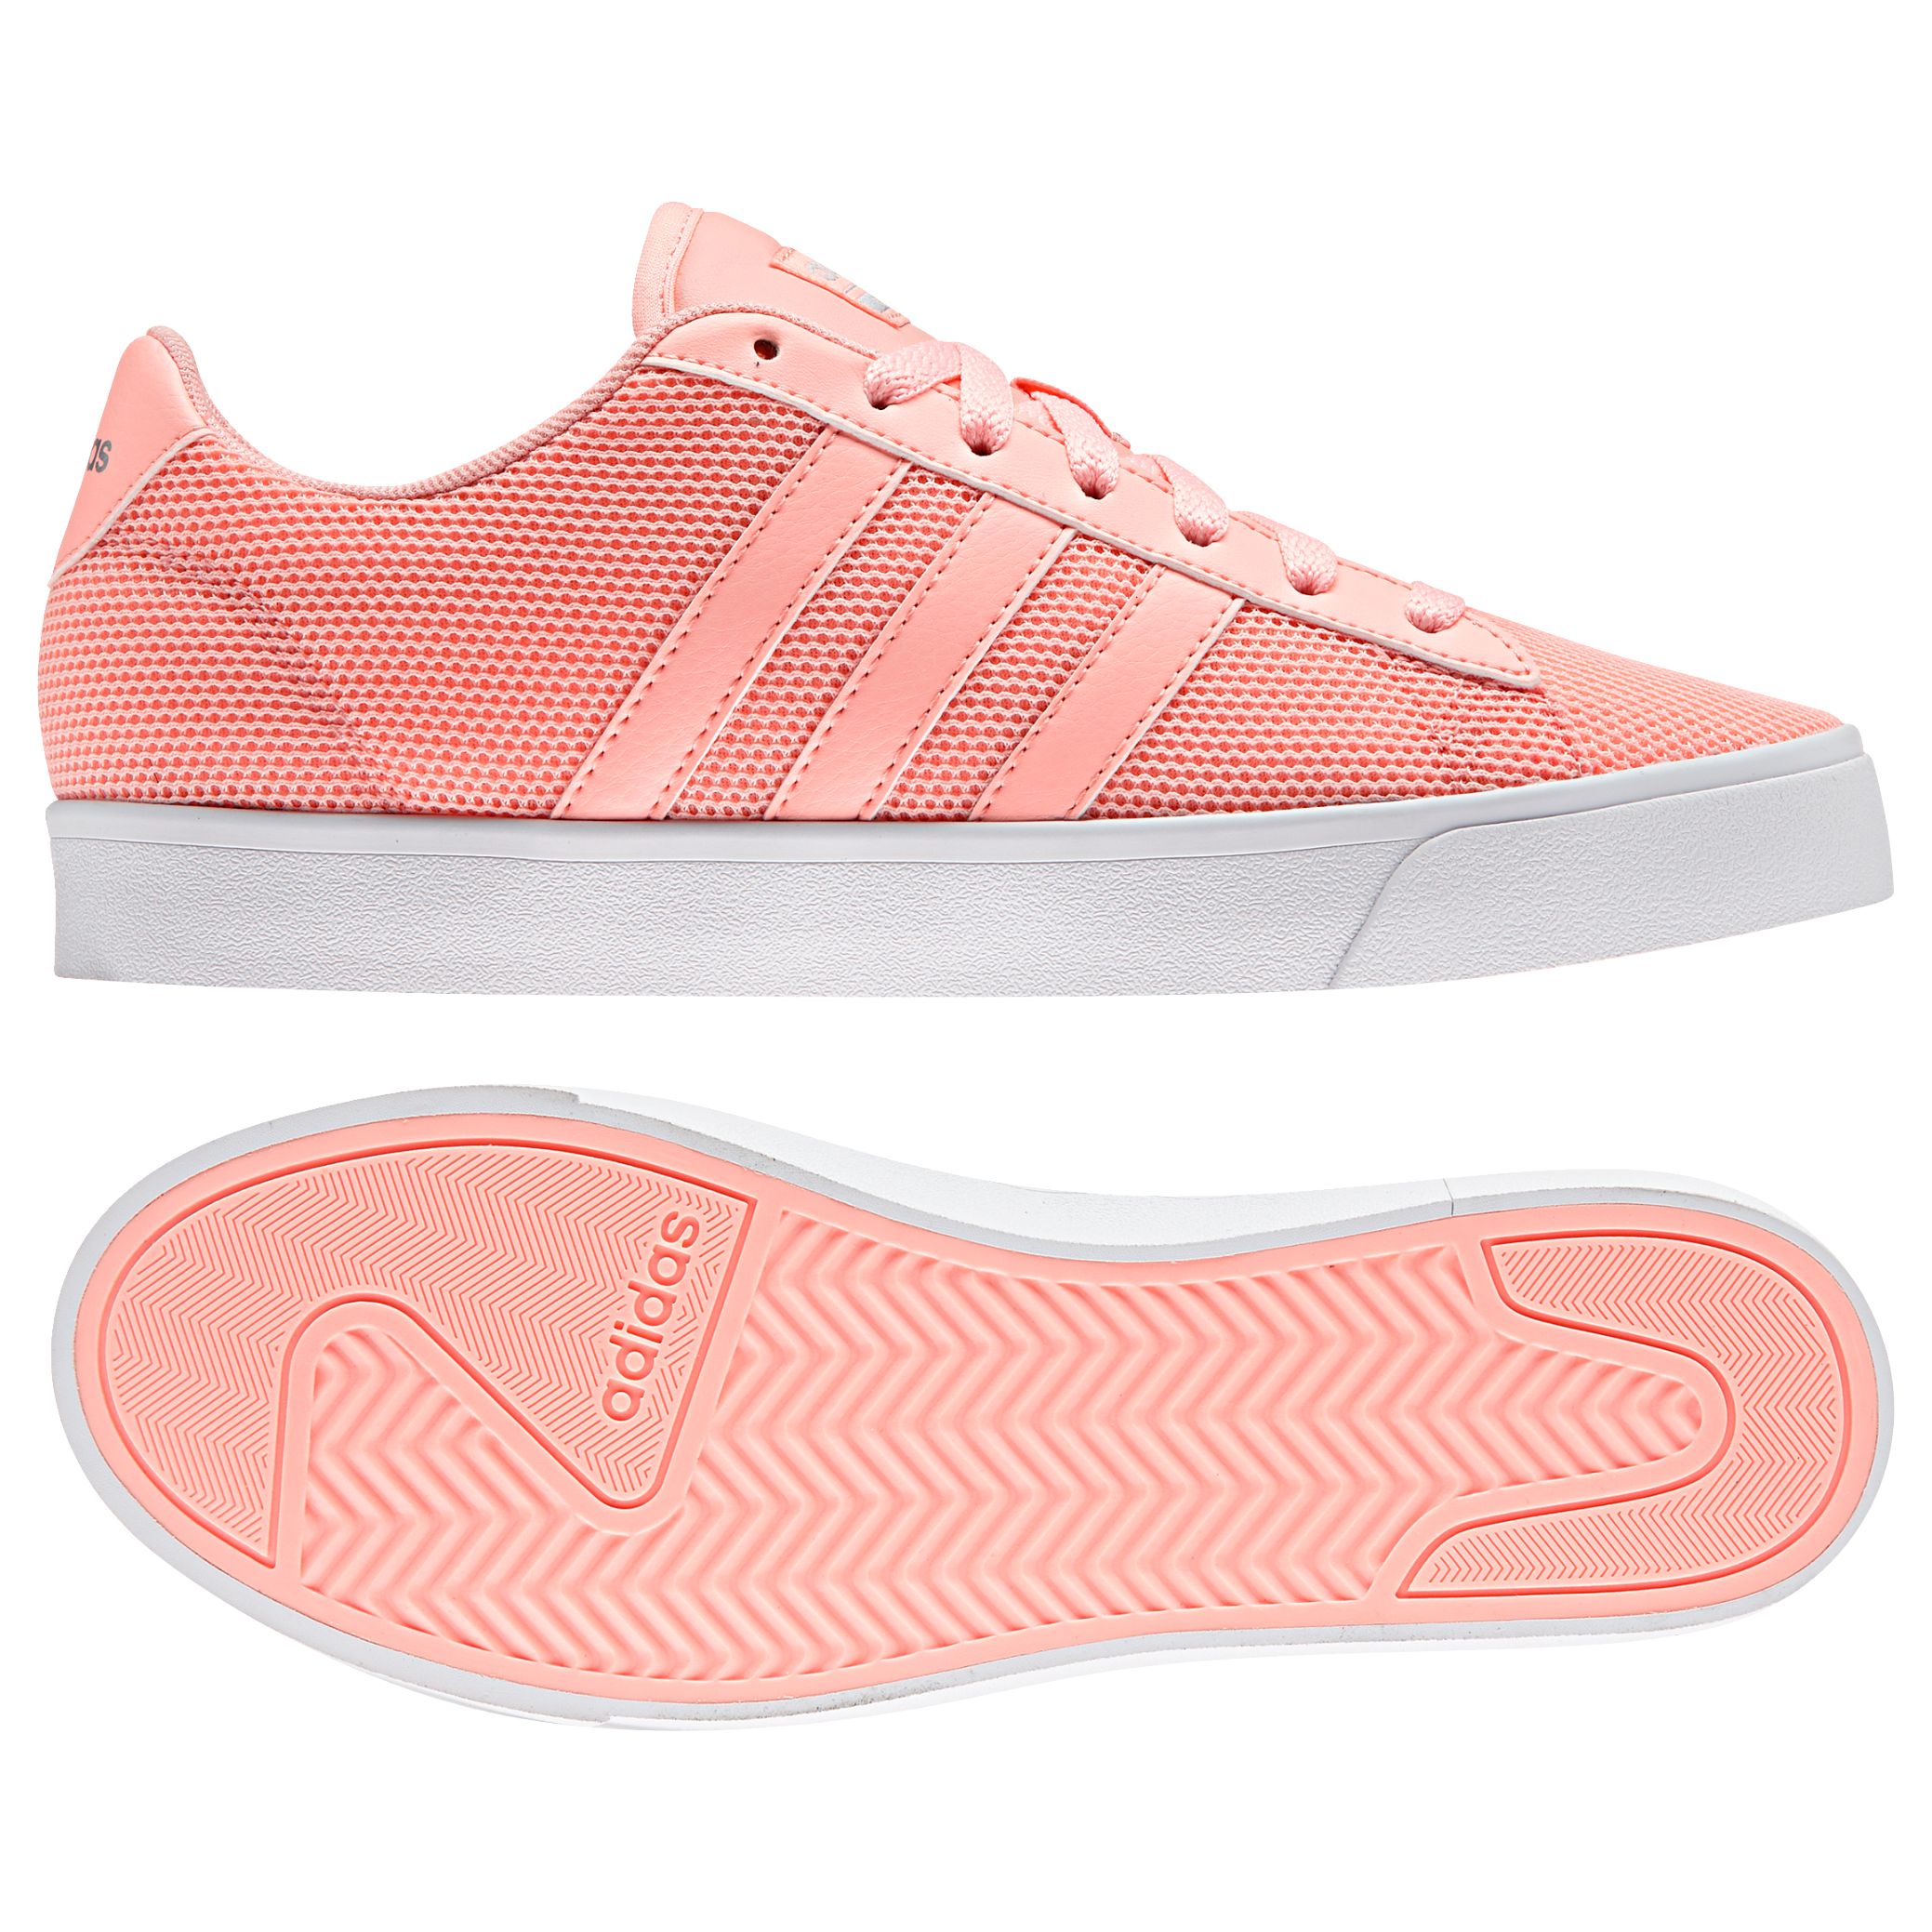 adidas neo red trainers